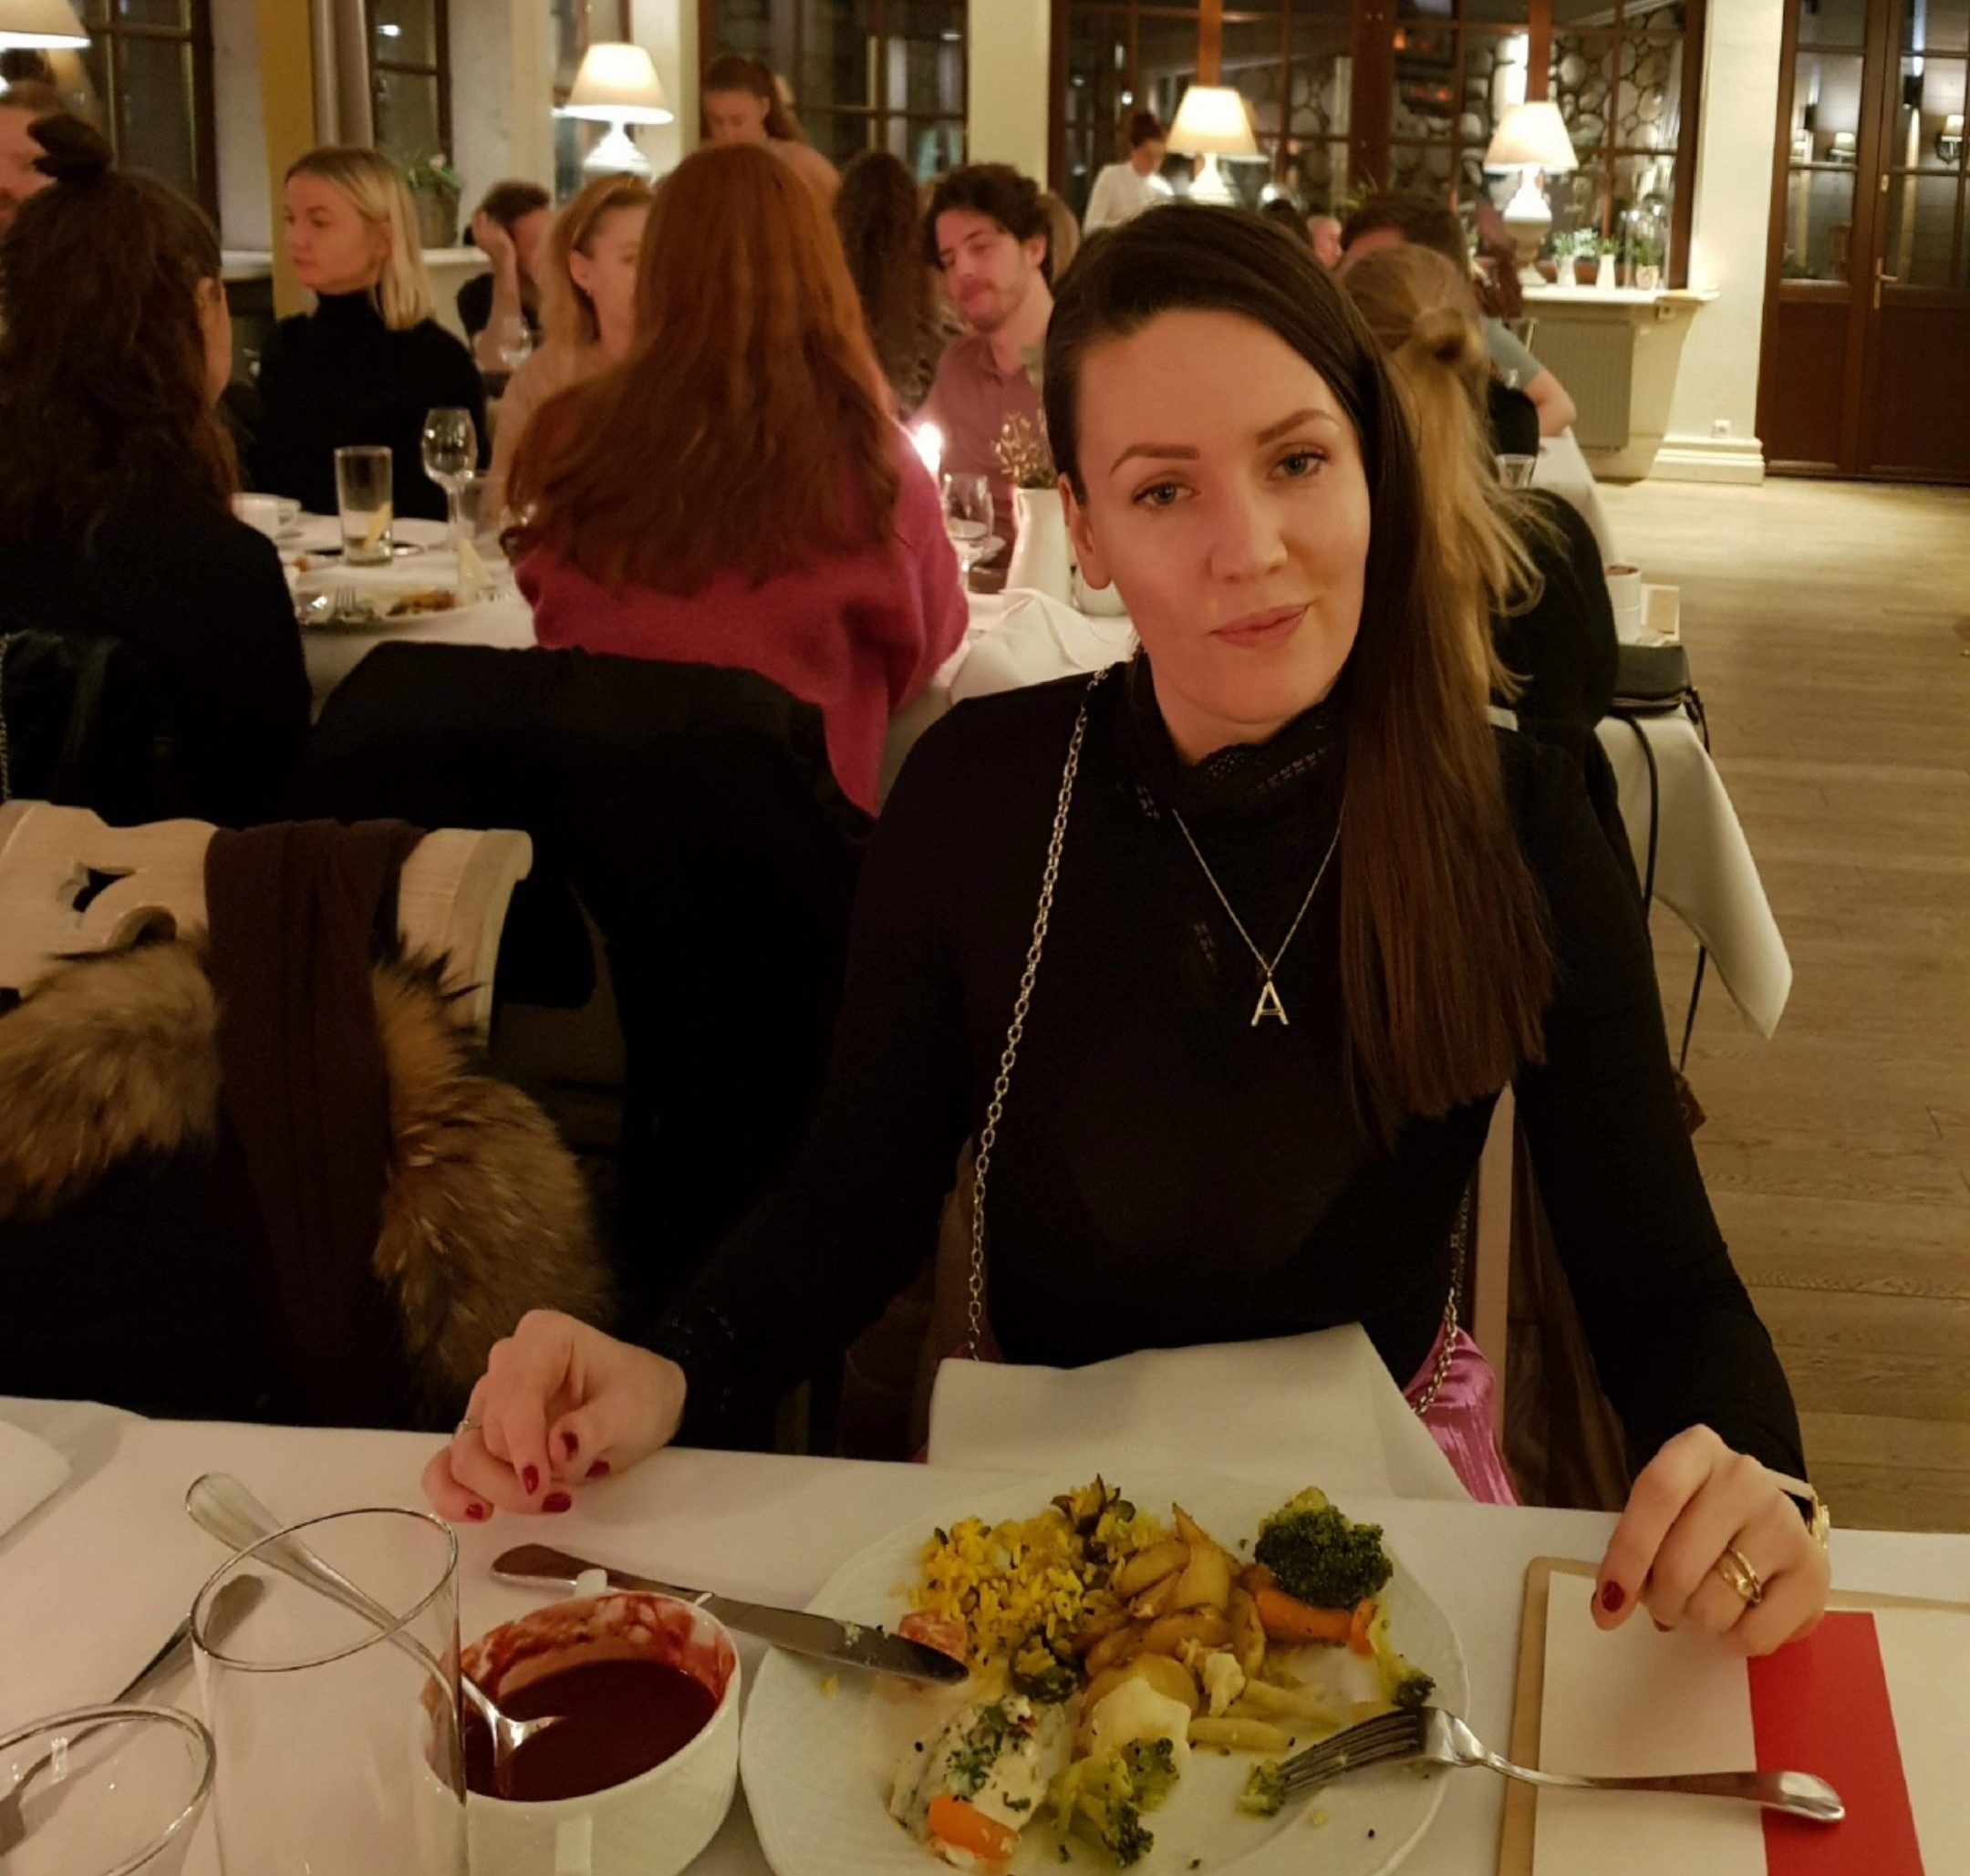 Lady eating in a restaurant